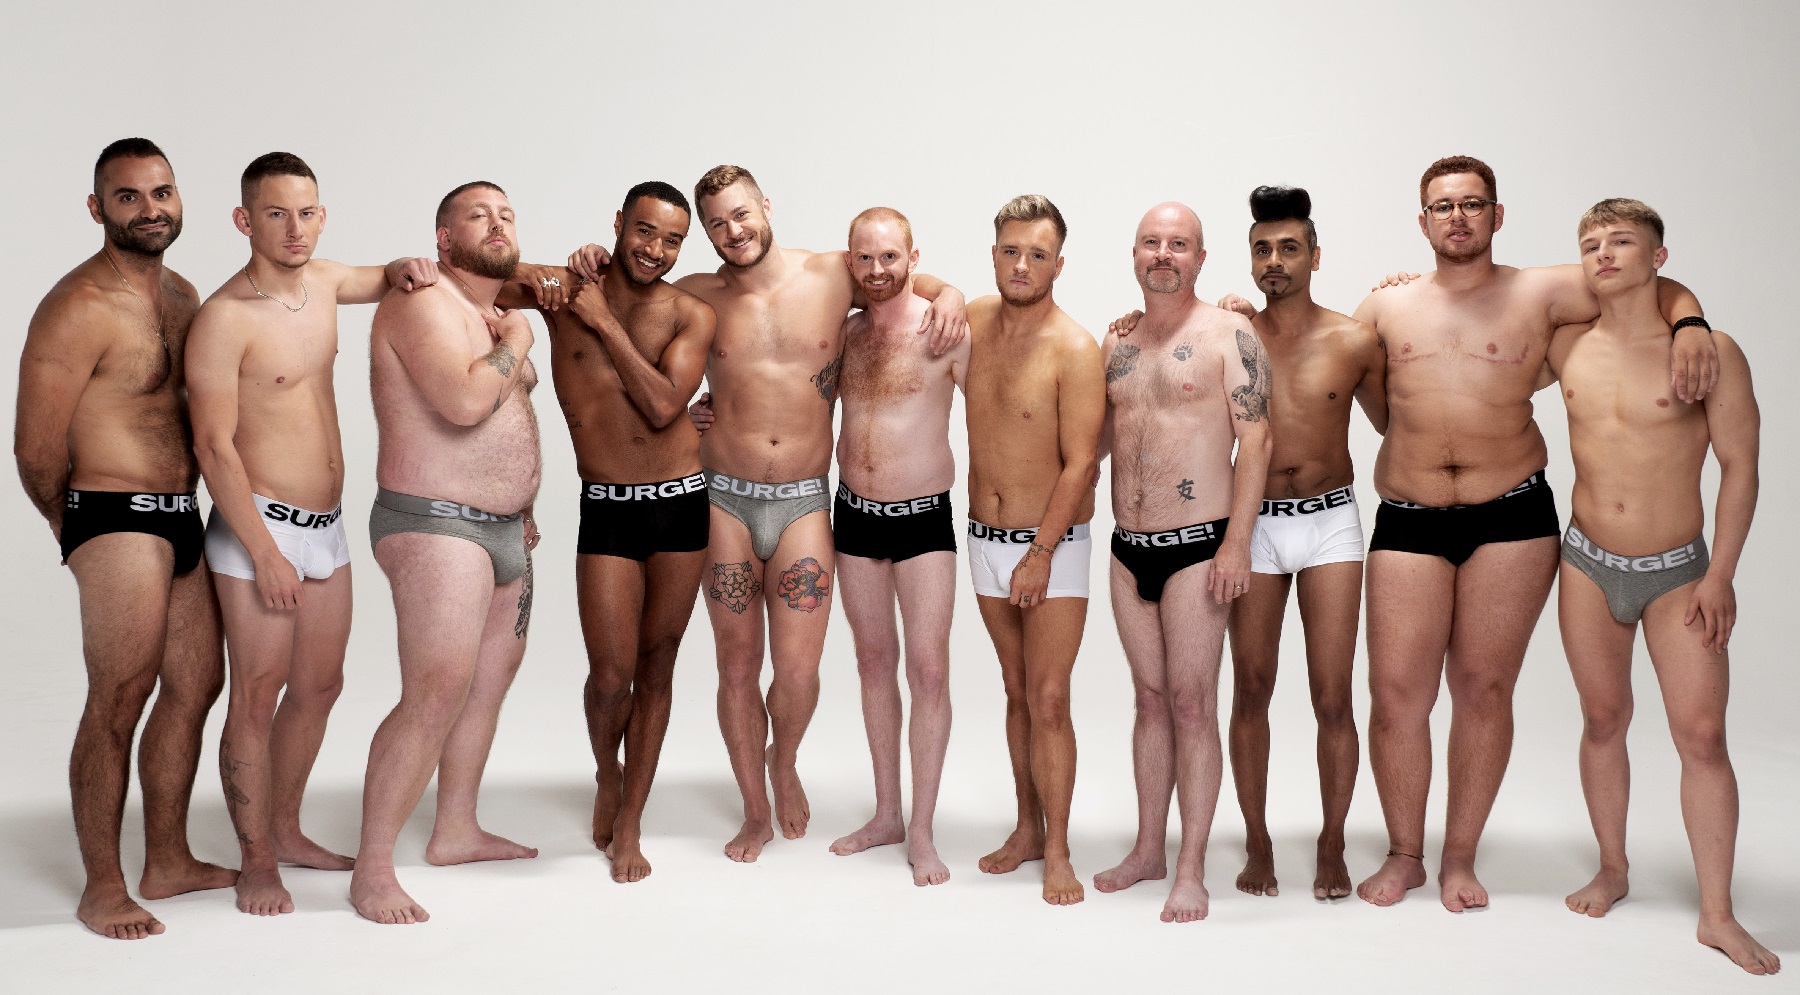 This new underwear brand is celebrating men of all shapes and sizes